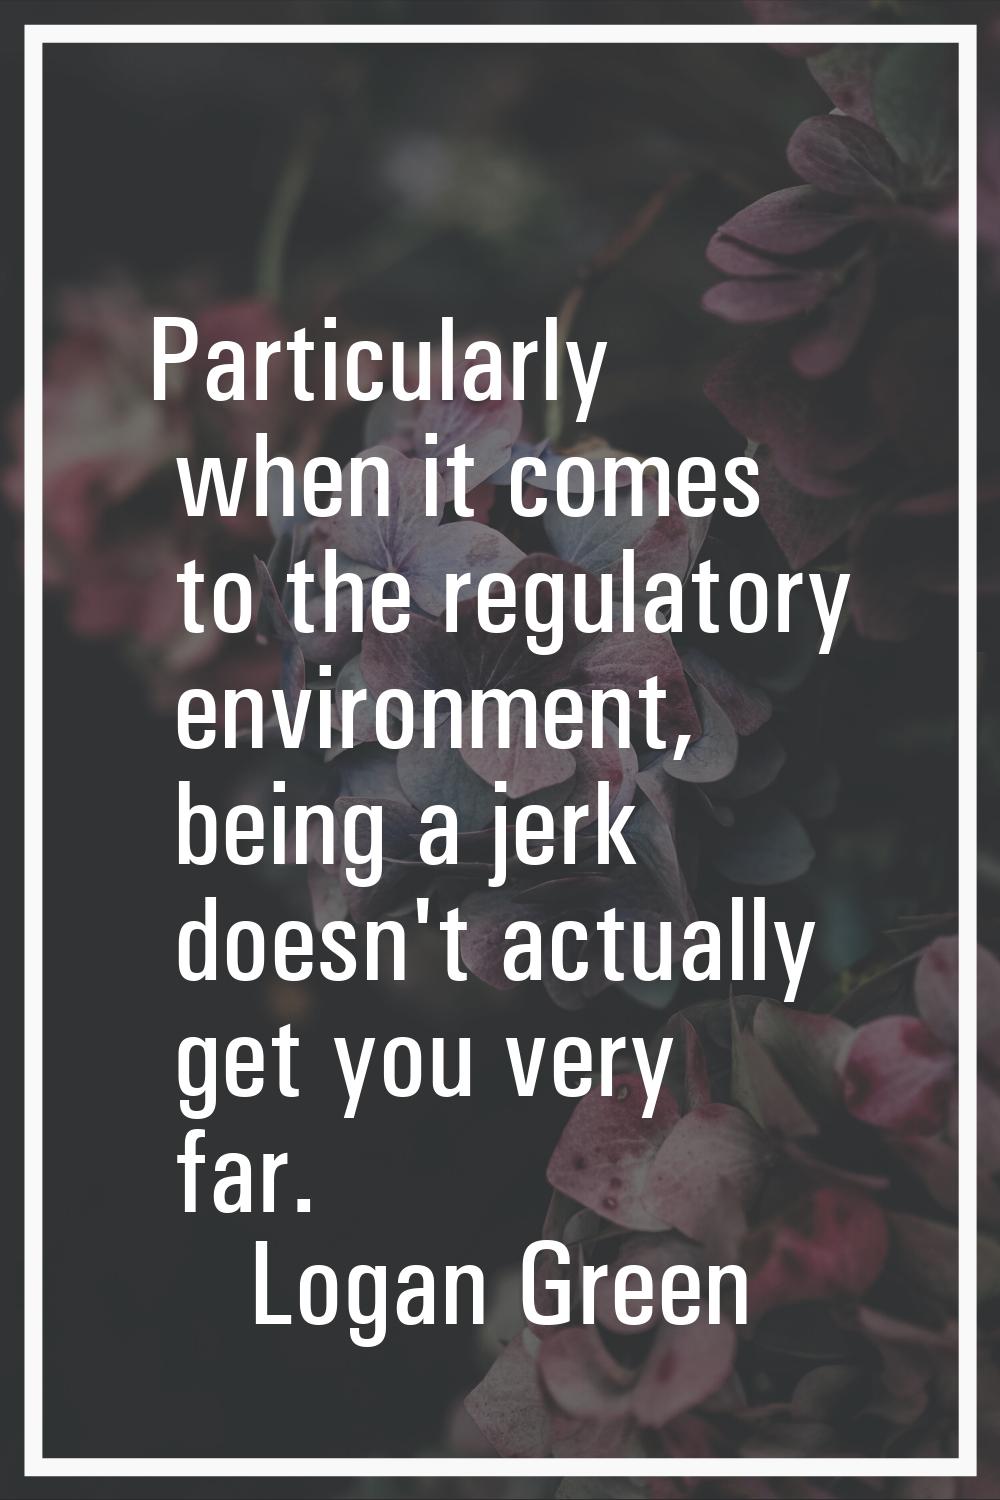 Particularly when it comes to the regulatory environment, being a jerk doesn't actually get you ver